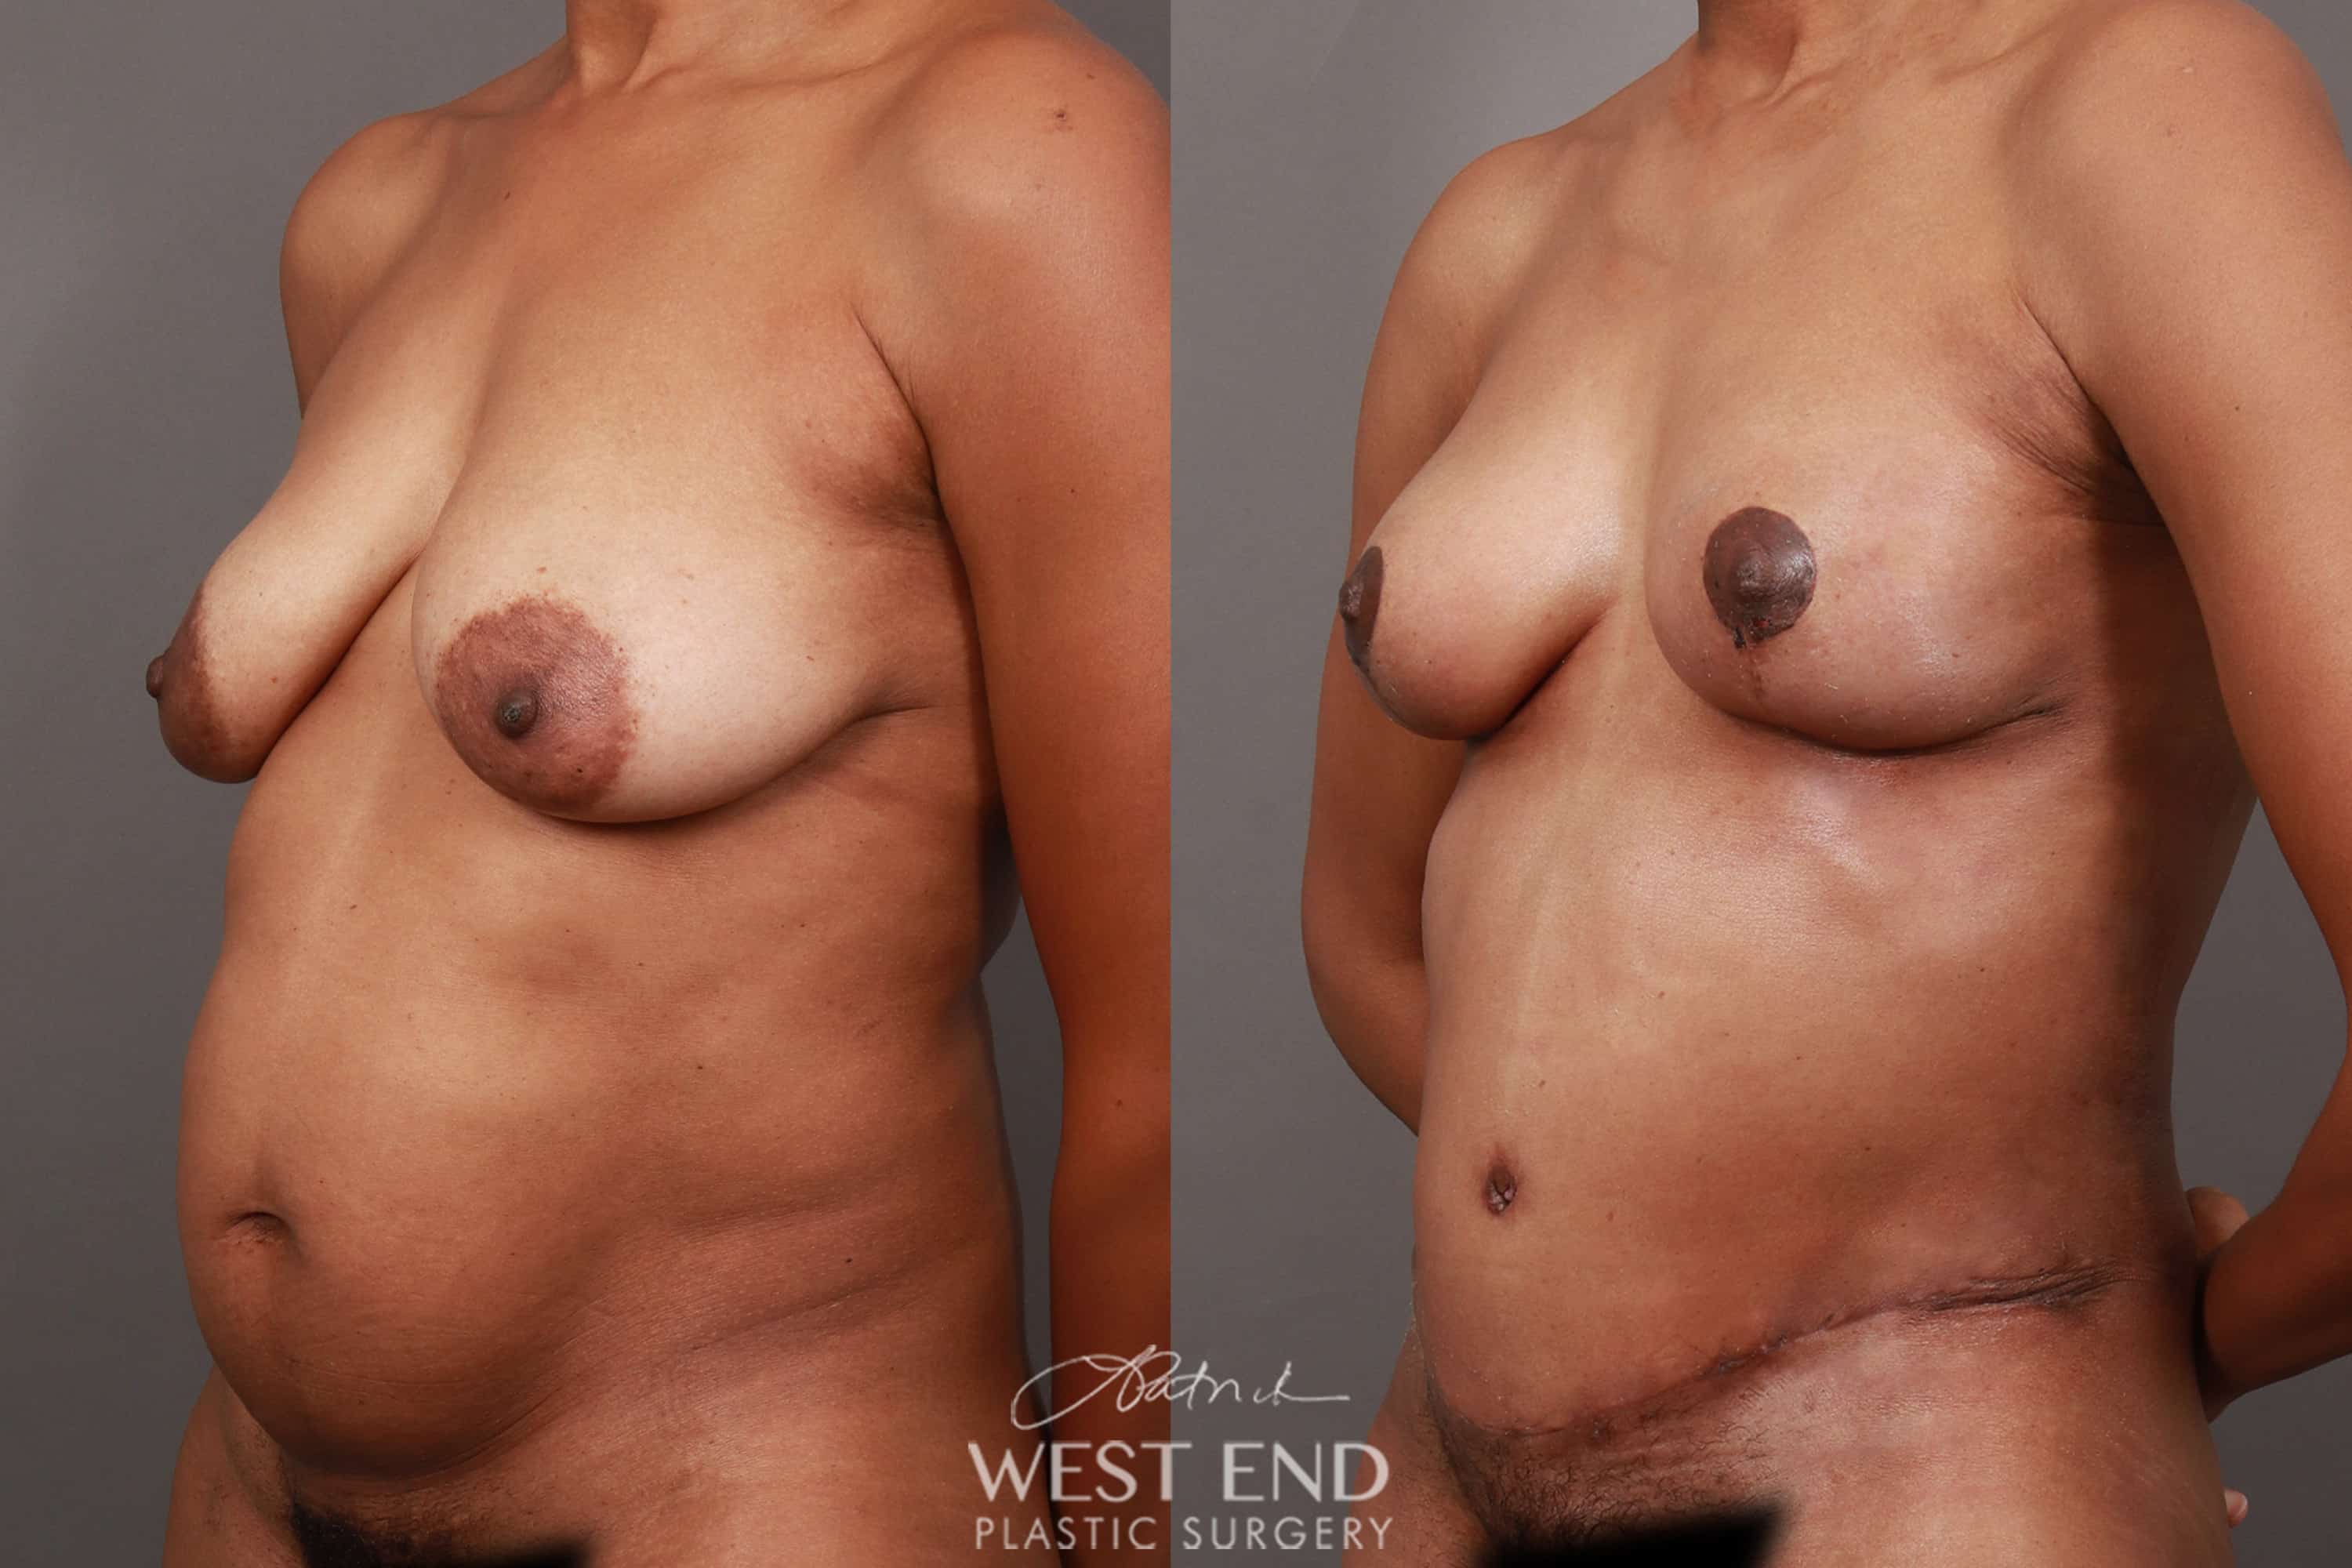 Breast Lift (1 Month Post-Op)